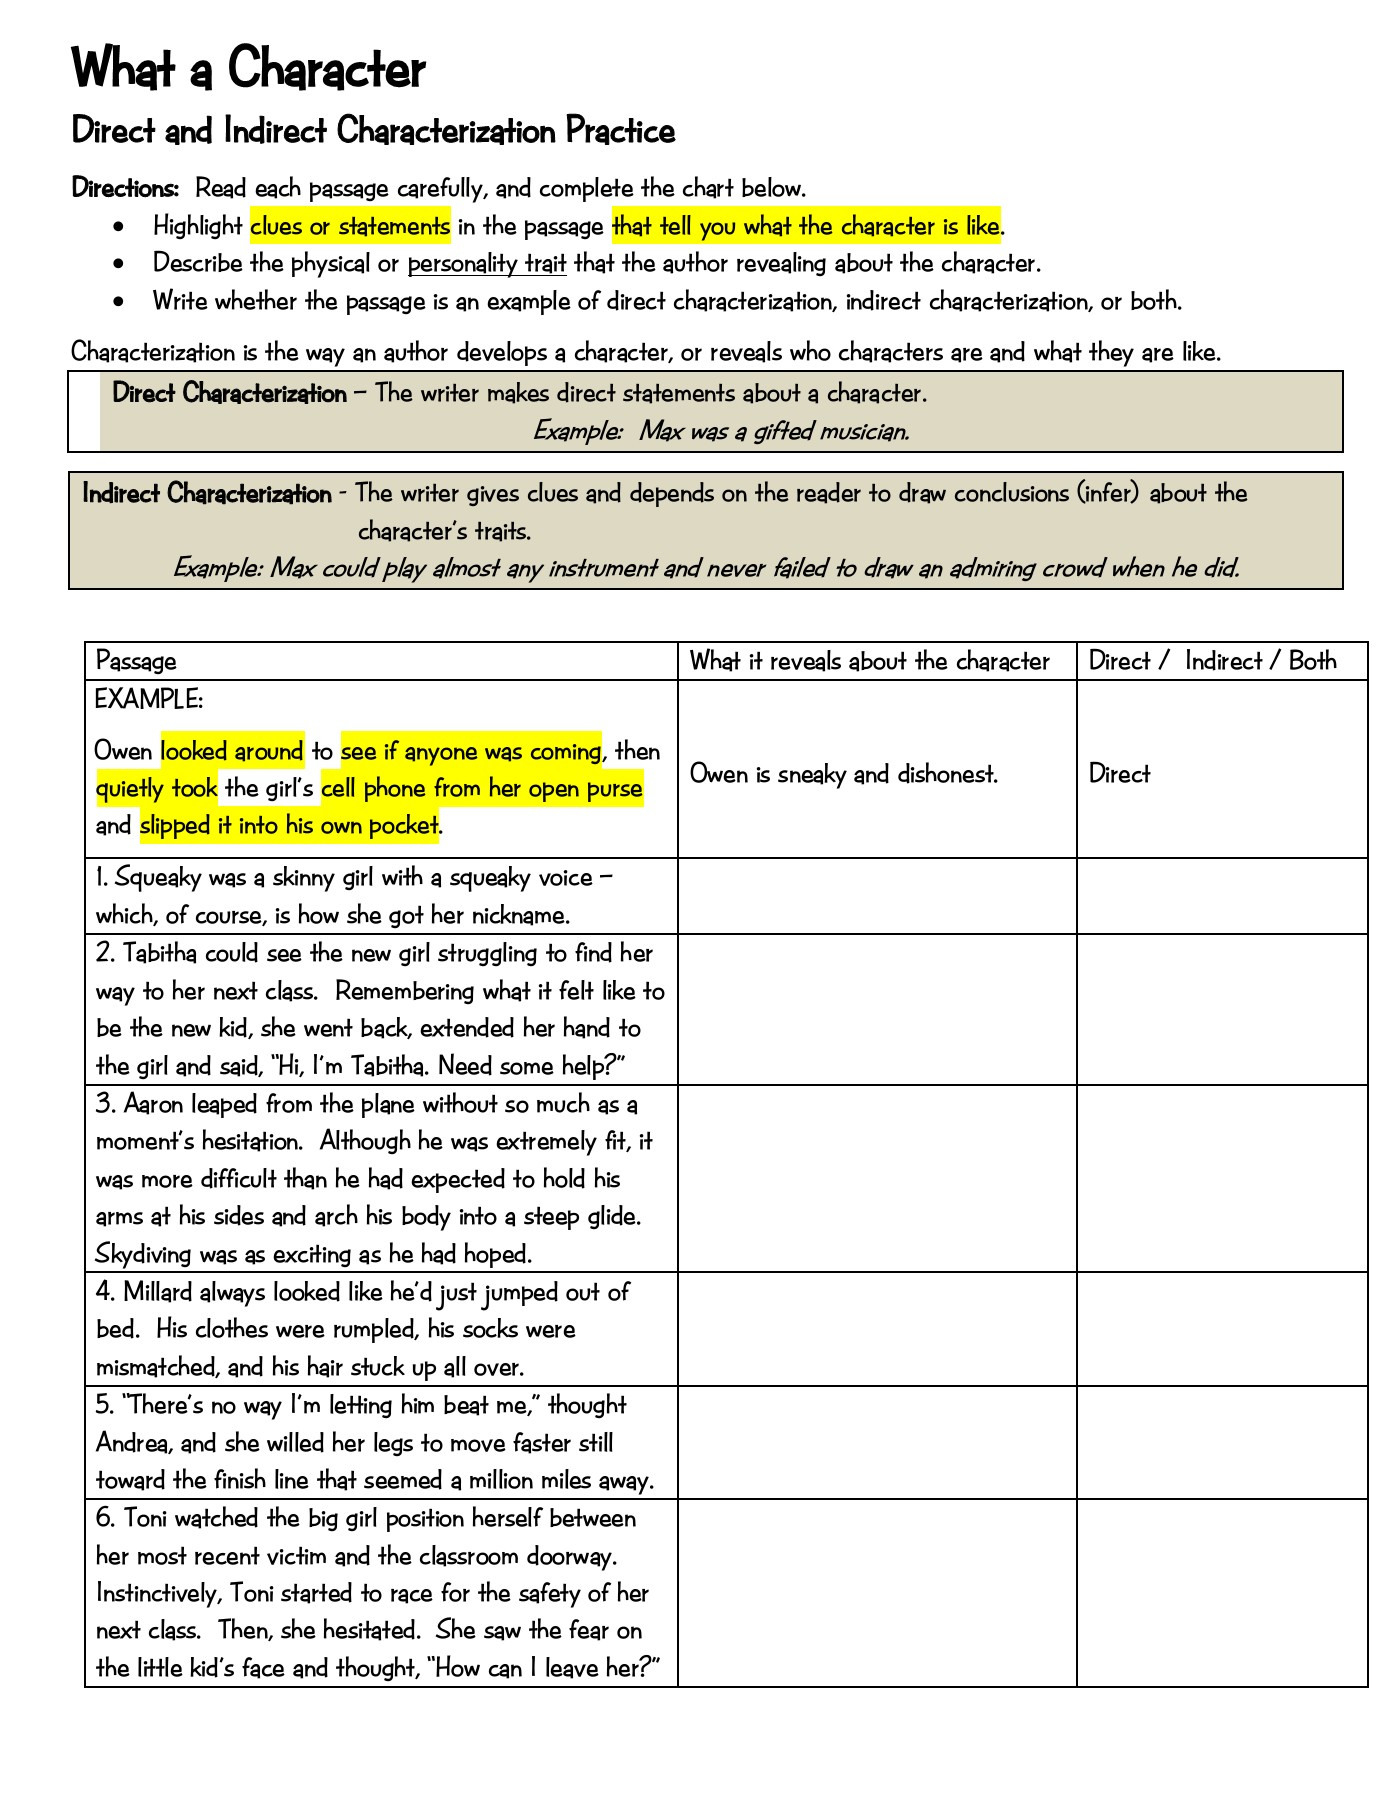 characterization-1-pages-1-2-text-version-anyflip-db-excel